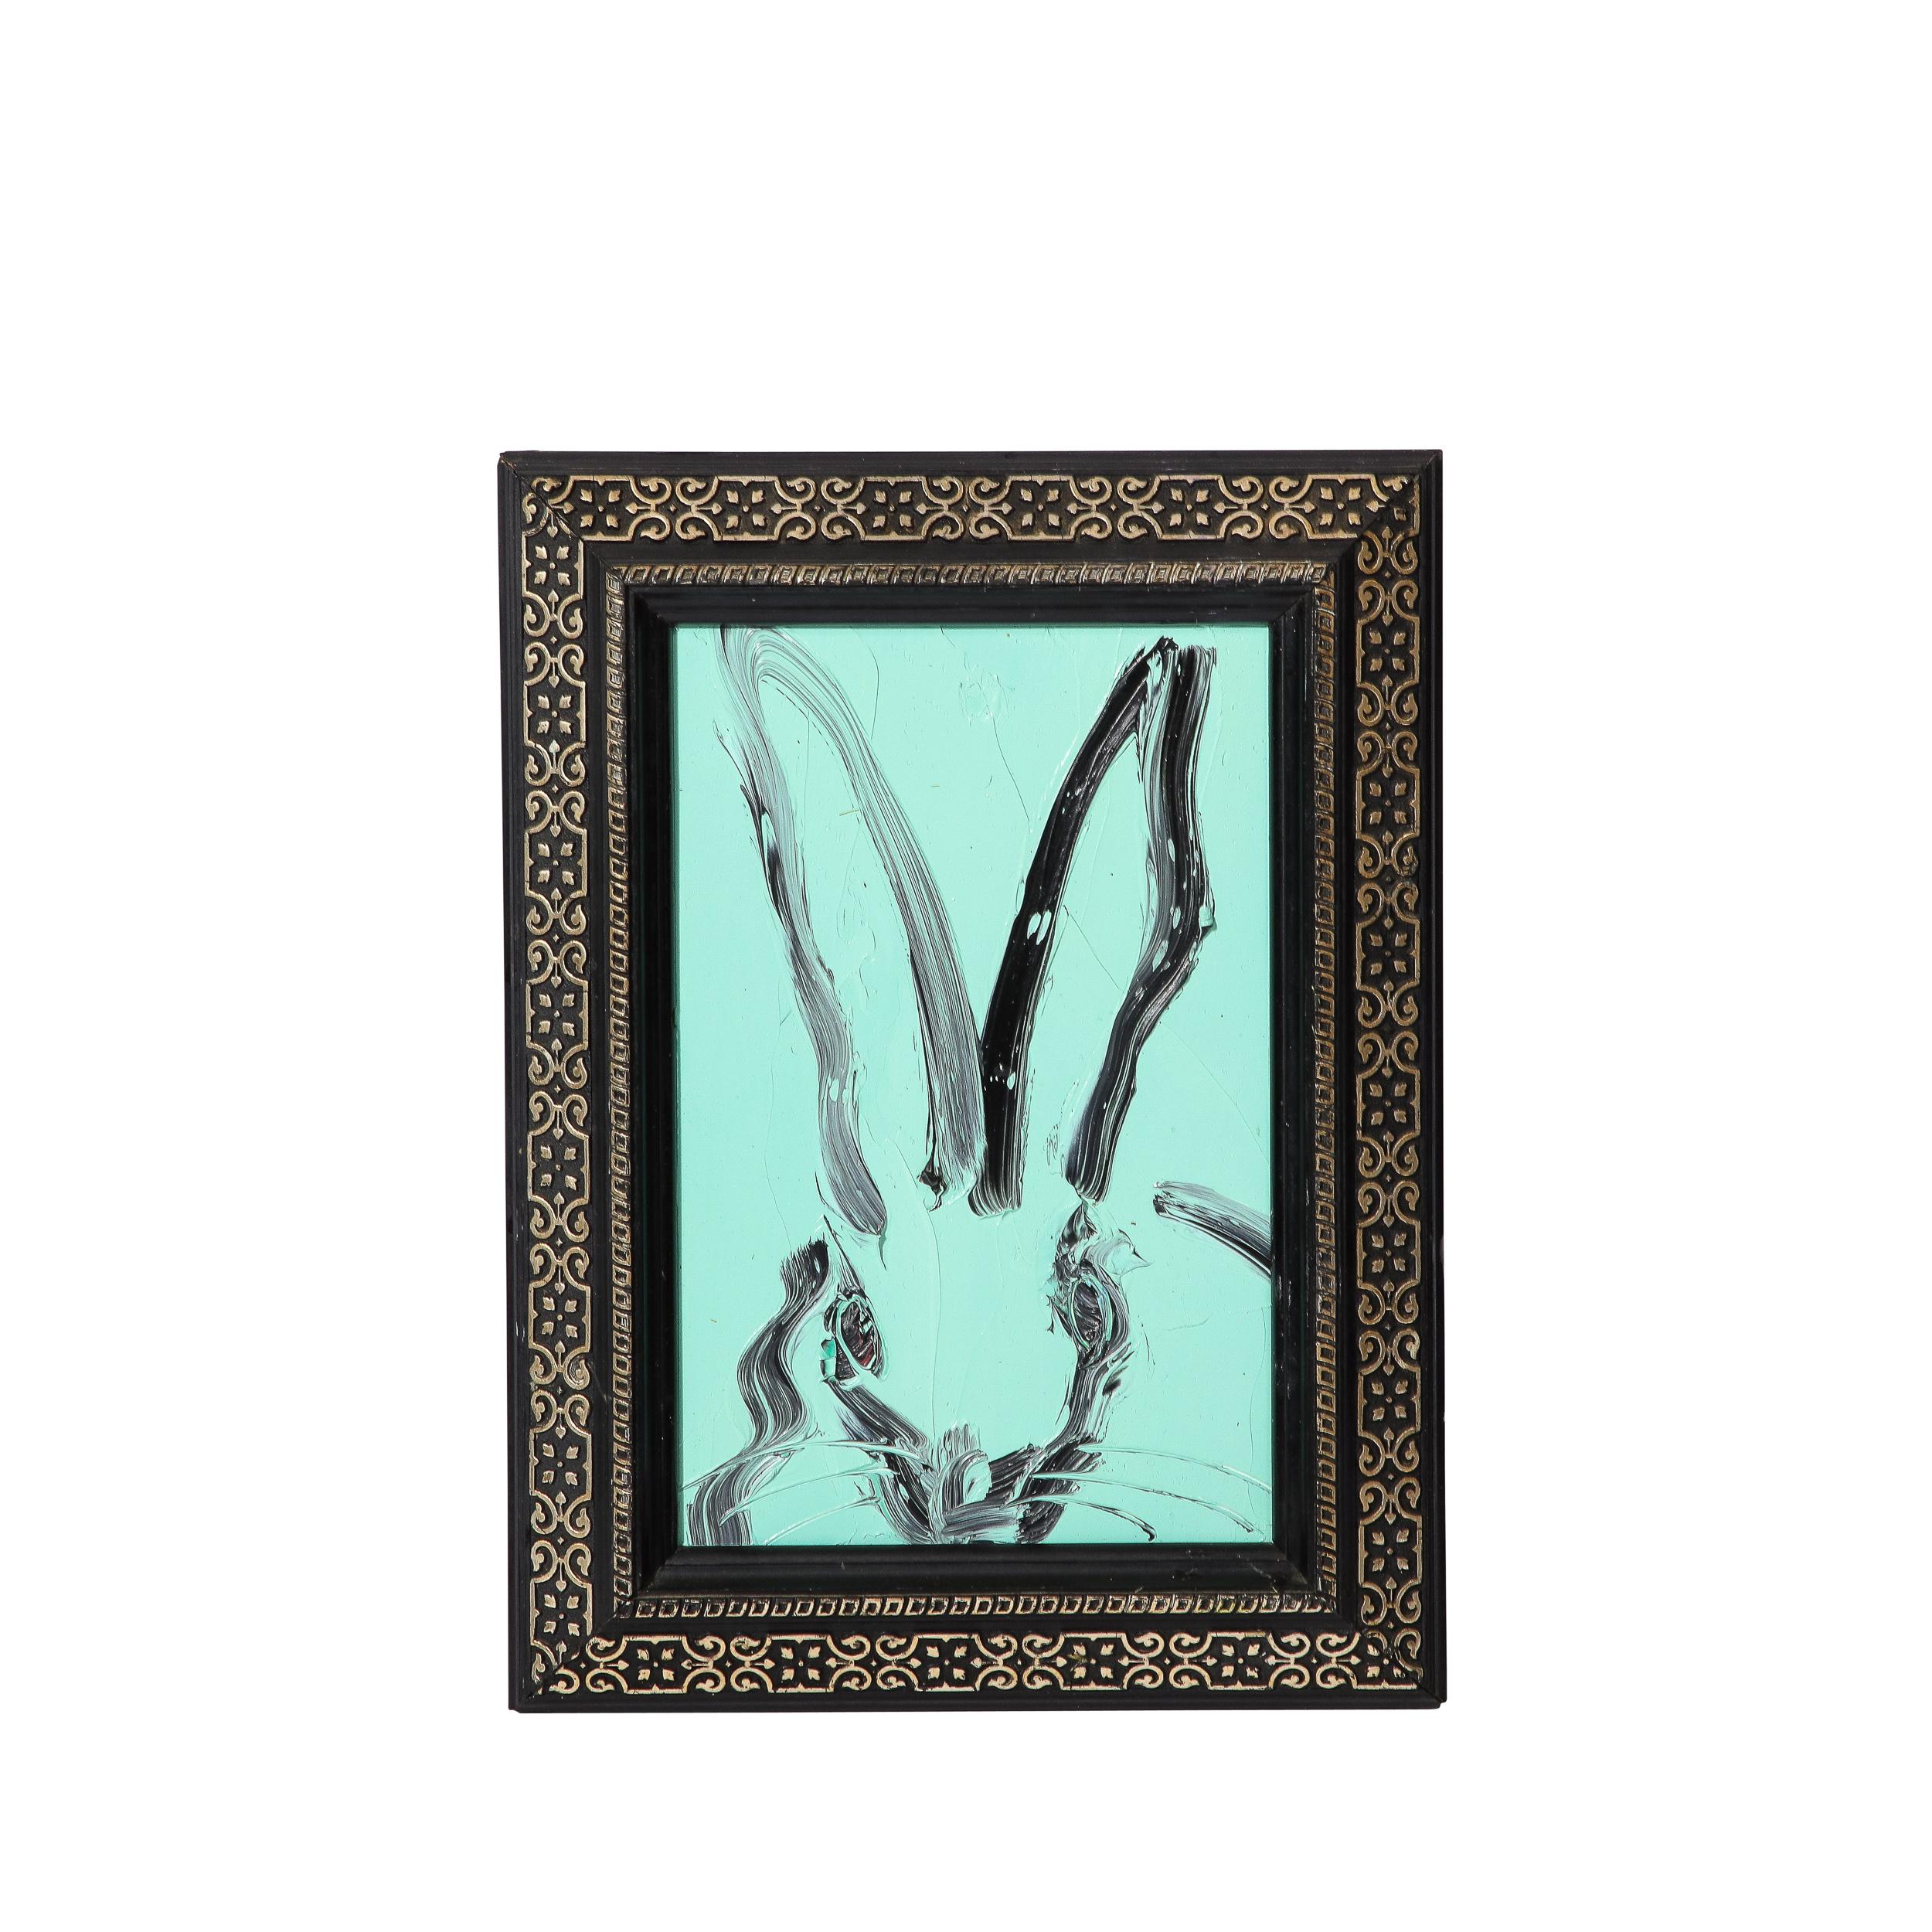 This whimsical and sophisticated painting was realized by the esteemed contemporary painter, Hunt Slonem in 2017. This piece features a lovely background in light blue green with deftly rendered brush strokes depicting a rabbit in black paint.  The